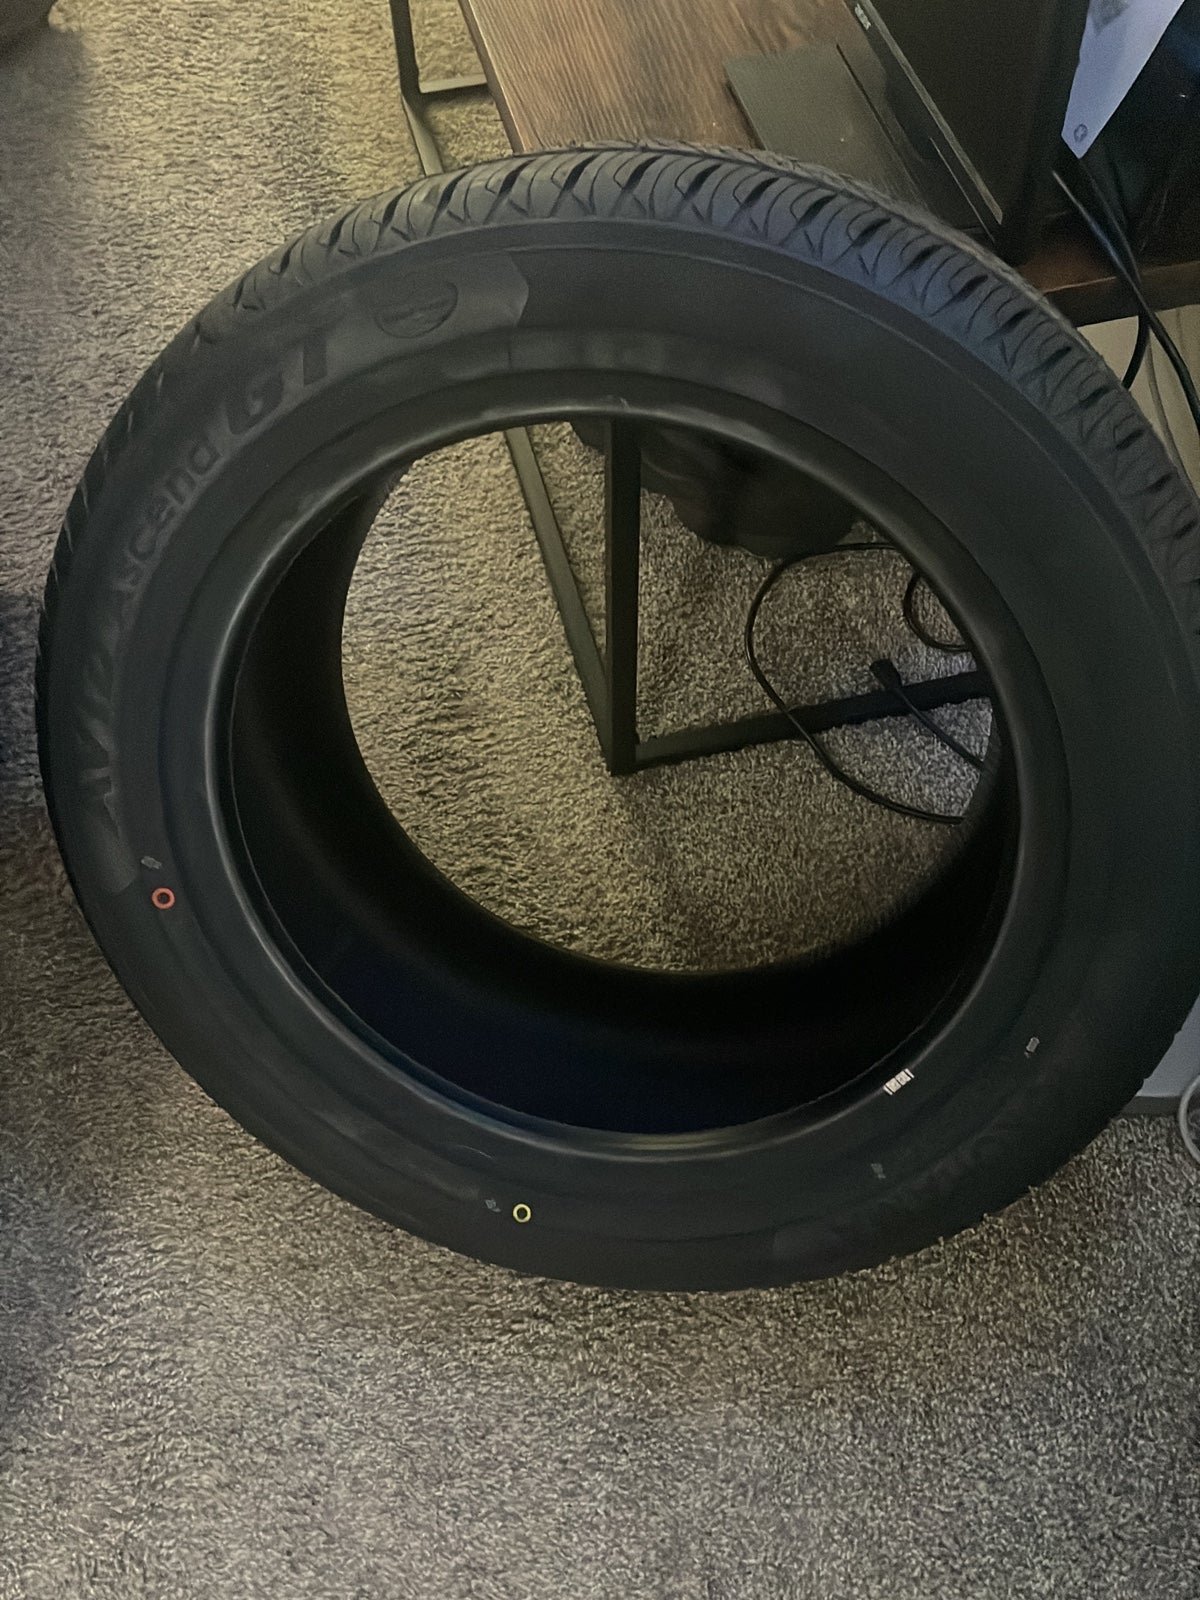 rims and tires gEQafIgpW